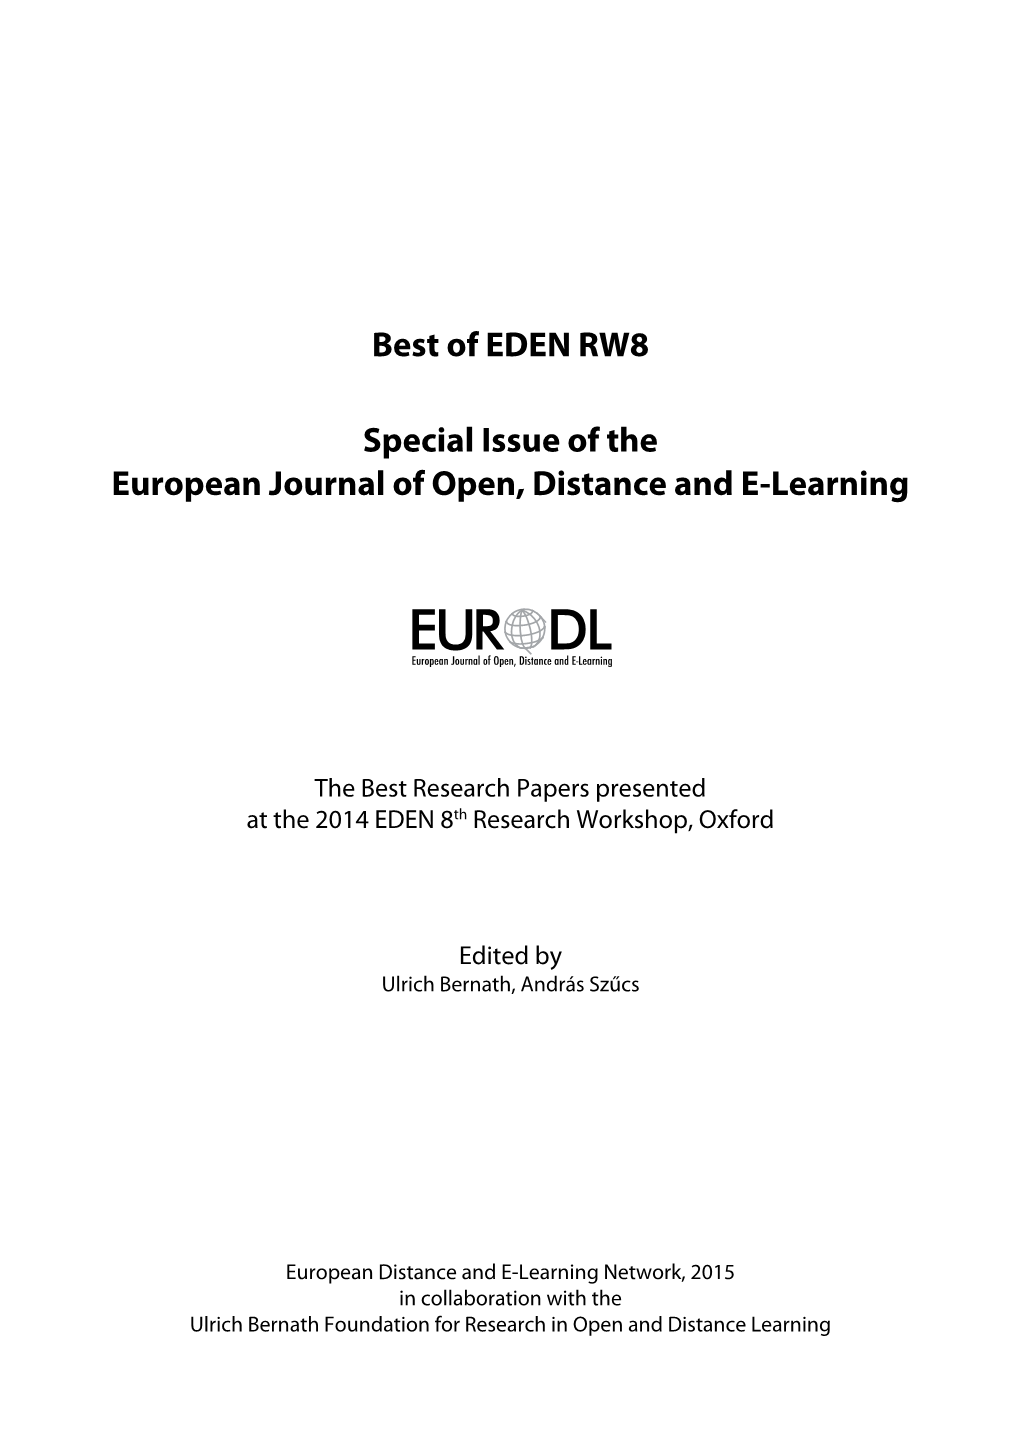 Best of EDEN RW8 Special Issue of the European Journal of Open